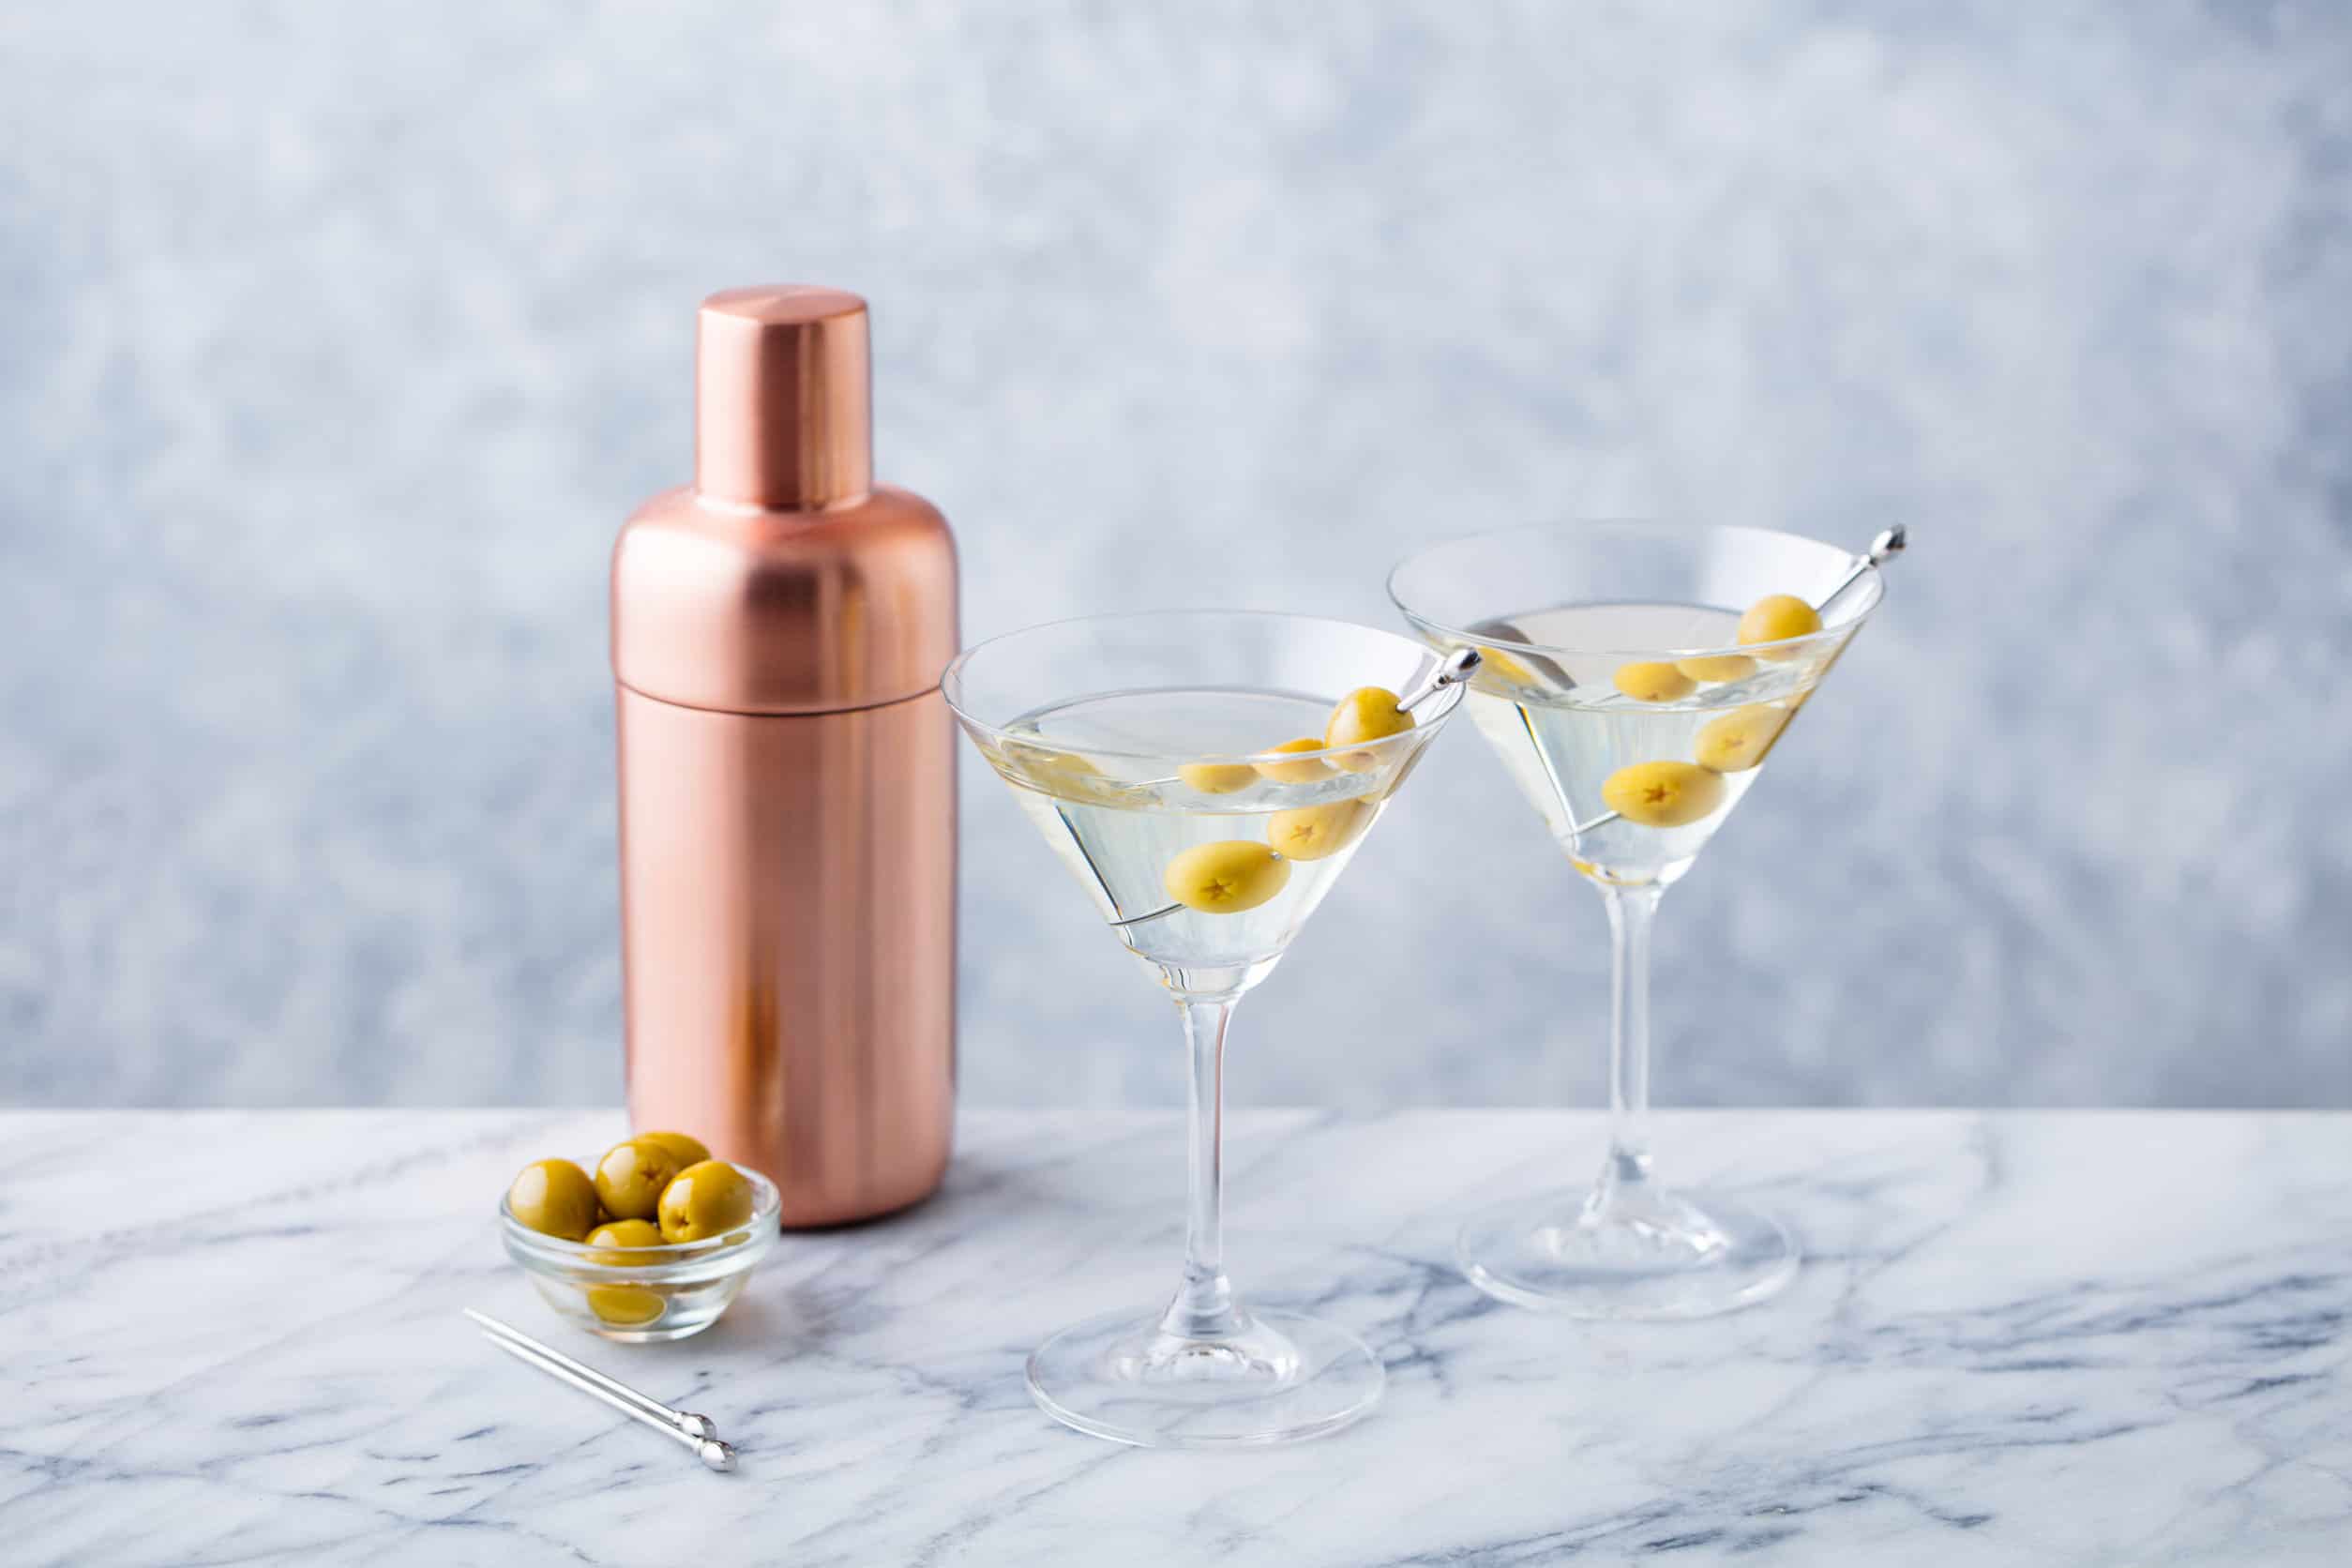 Martini Cocktail With Green Olives, Shaker On Marble Table Background.